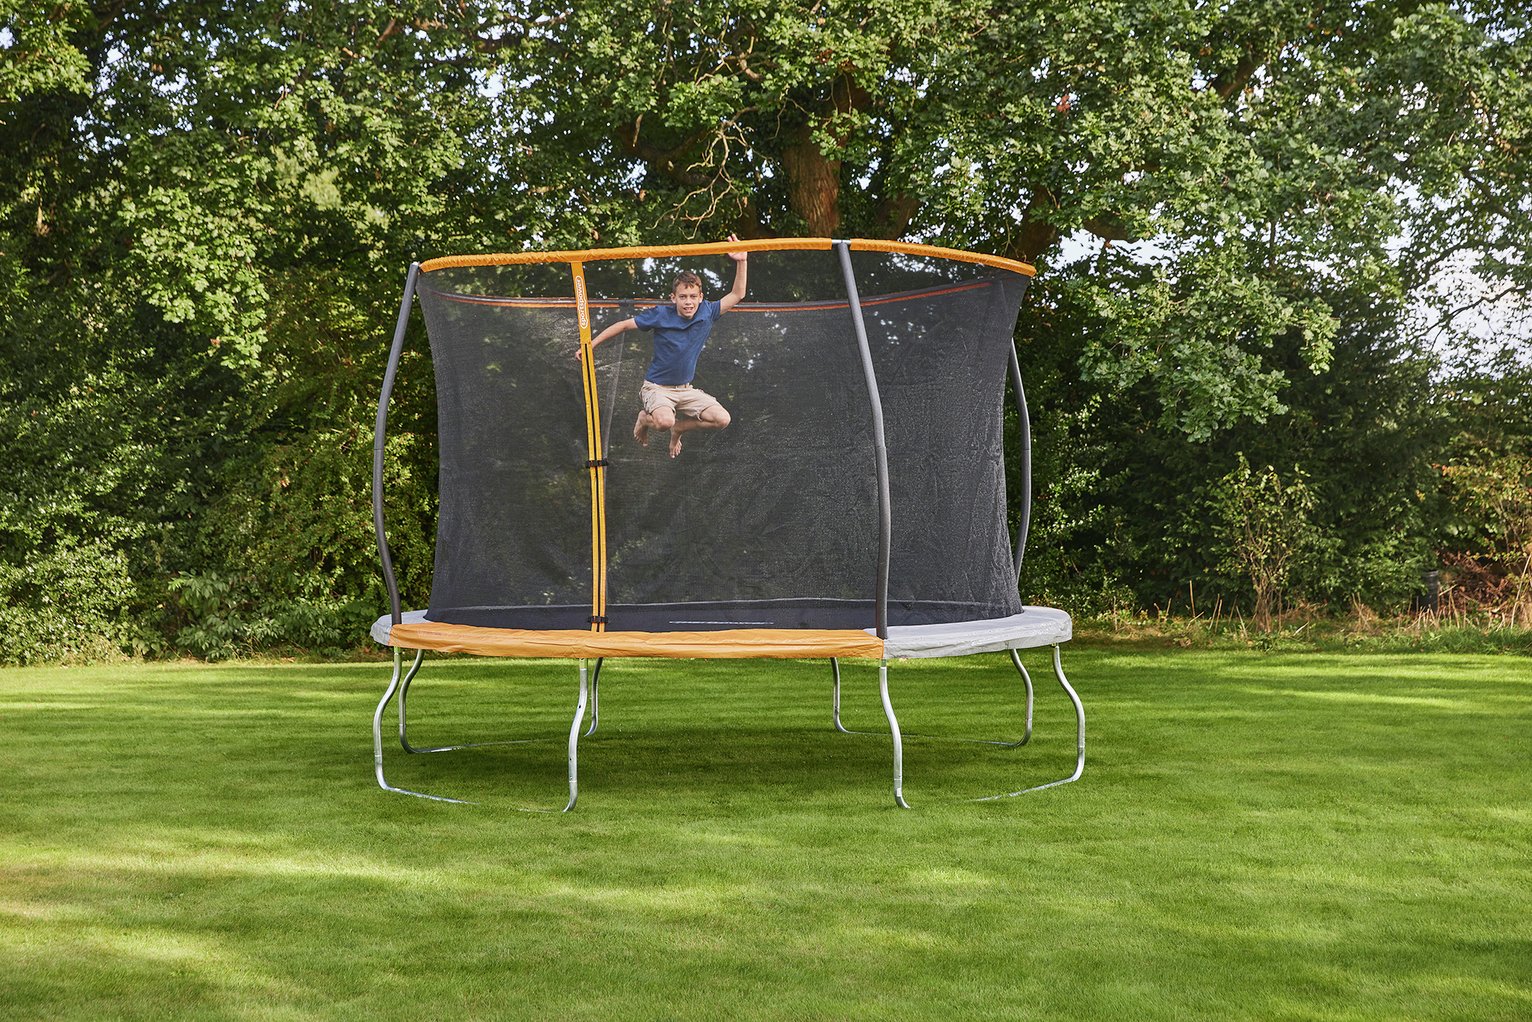 Sportspower 10ft Outdoor Kids Trampoline with Enclosure Review